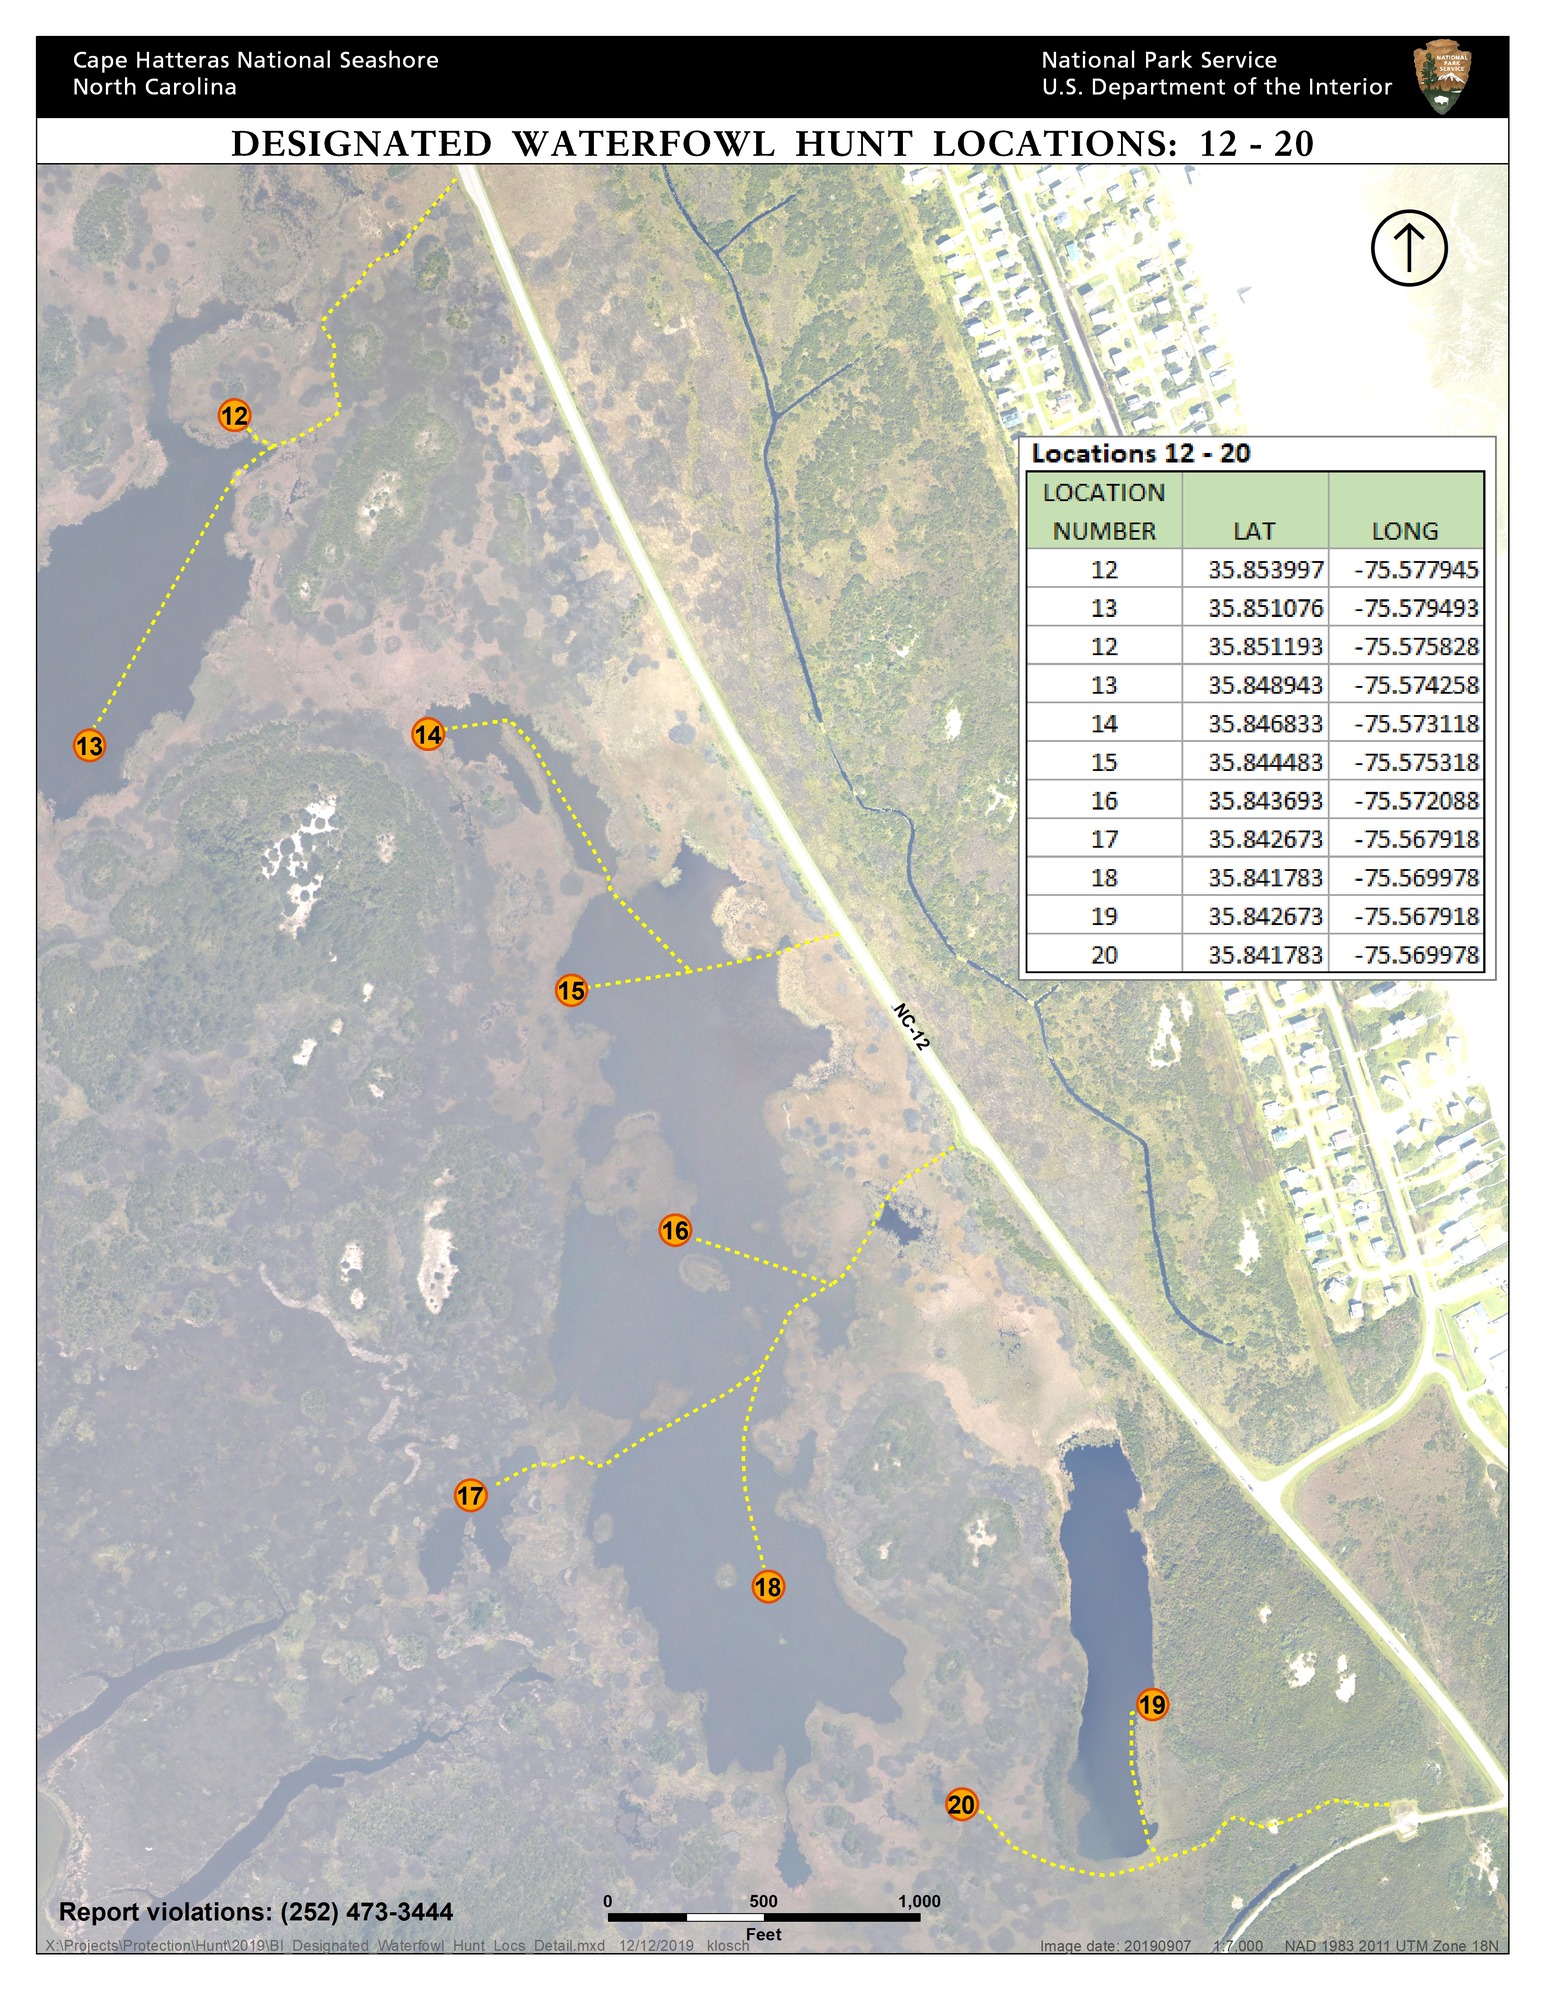 Location map of Bodie Island waterfowl hunting areas 12-20.